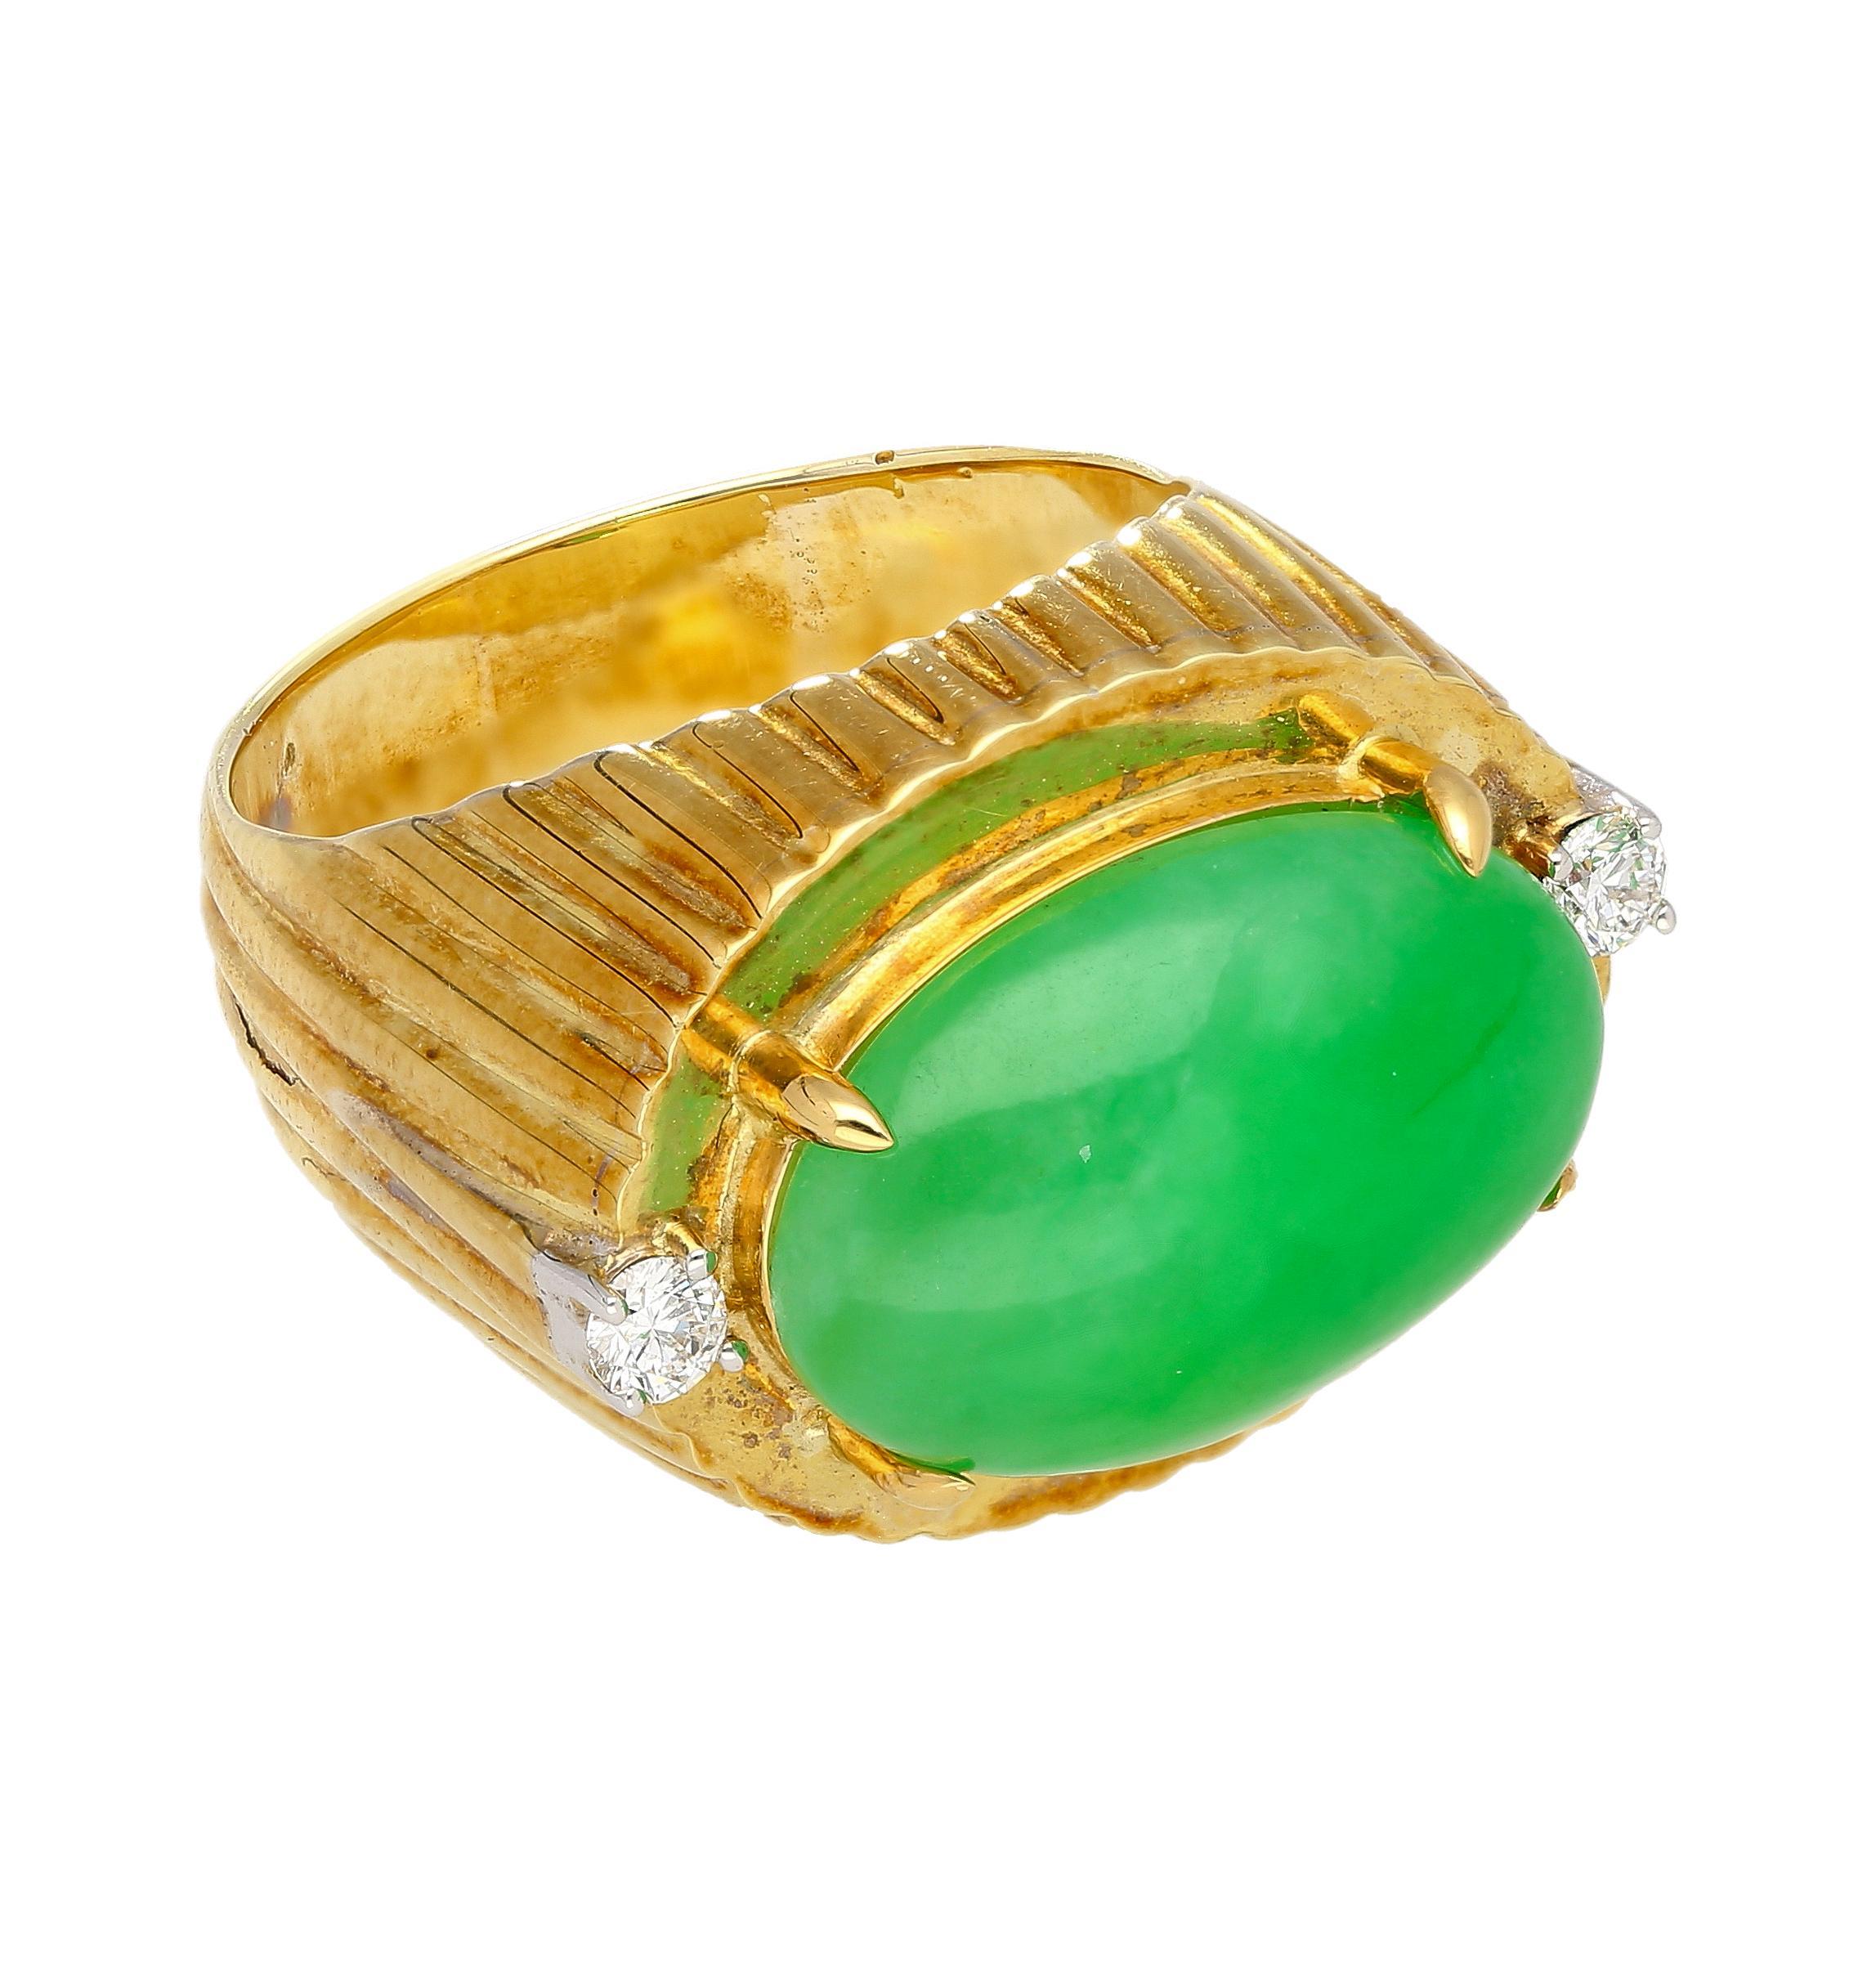 Contemporary 9.40 Carat Type A Fei Cui Jadeite Jade and Diamond Ring in Textured 18K Gold For Sale